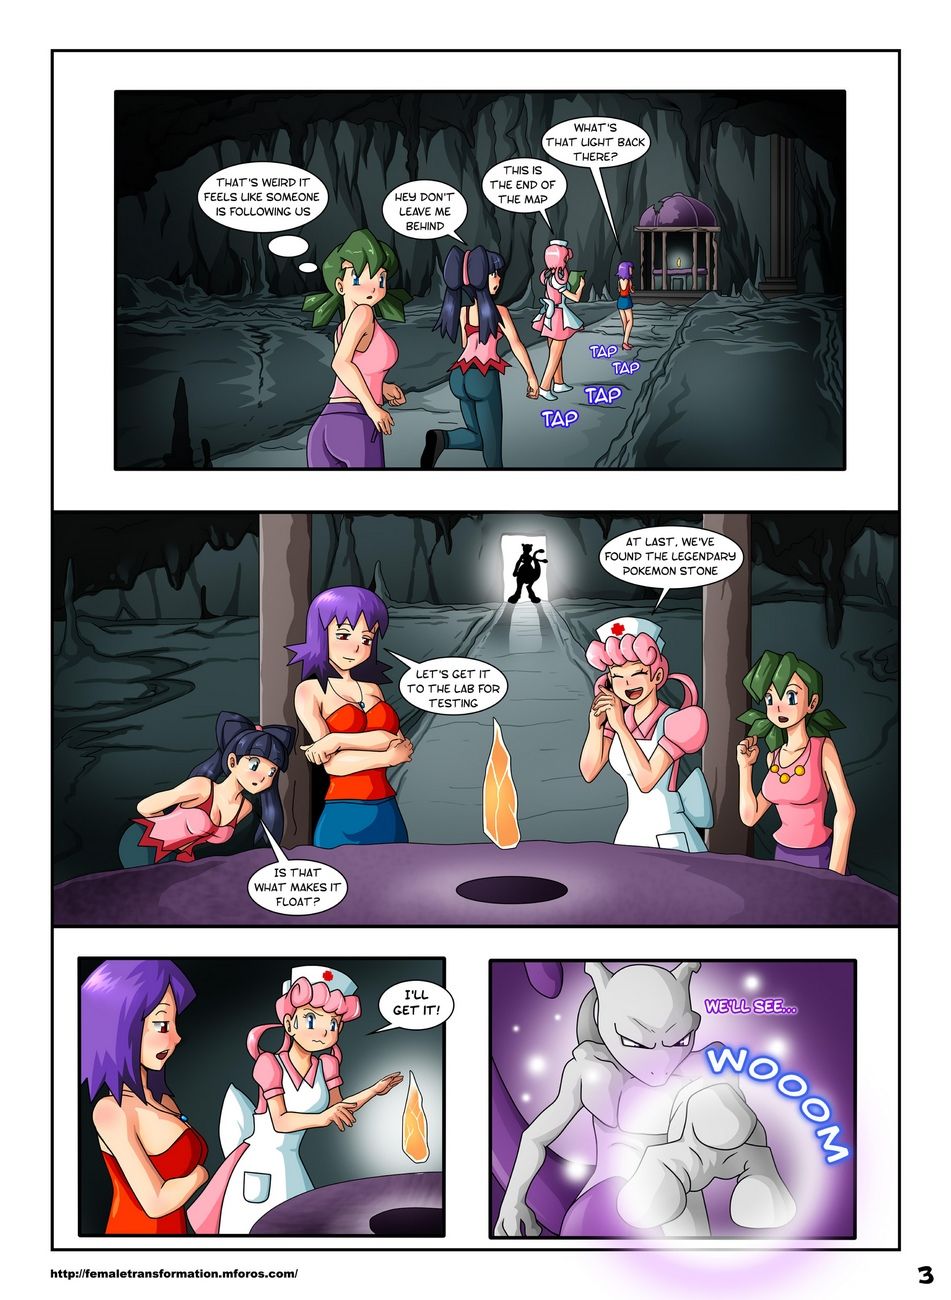 Pokemaidens 1 page 4